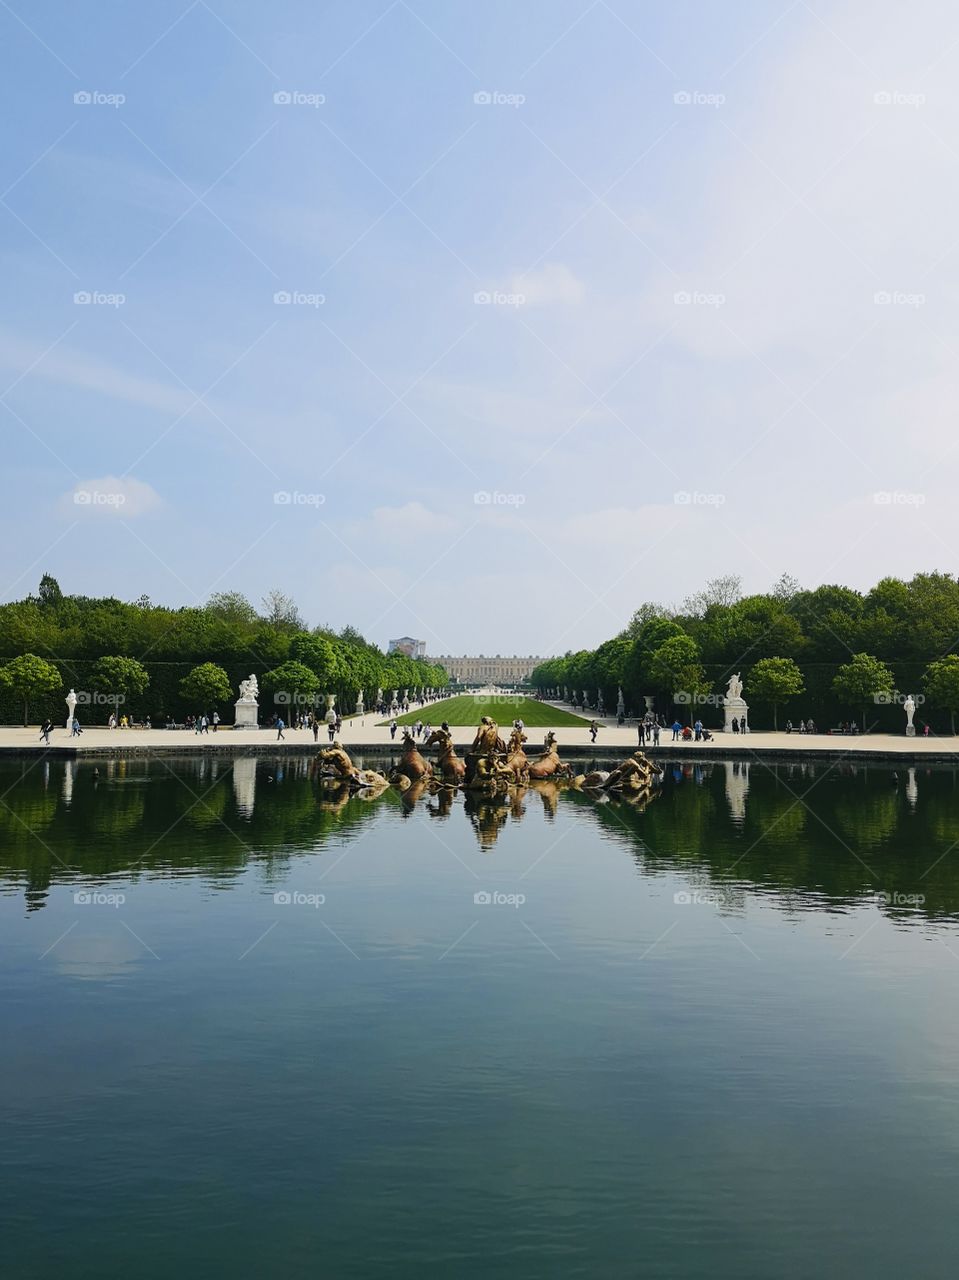 The garden of the Palace of Versailles on the reflection of the lake